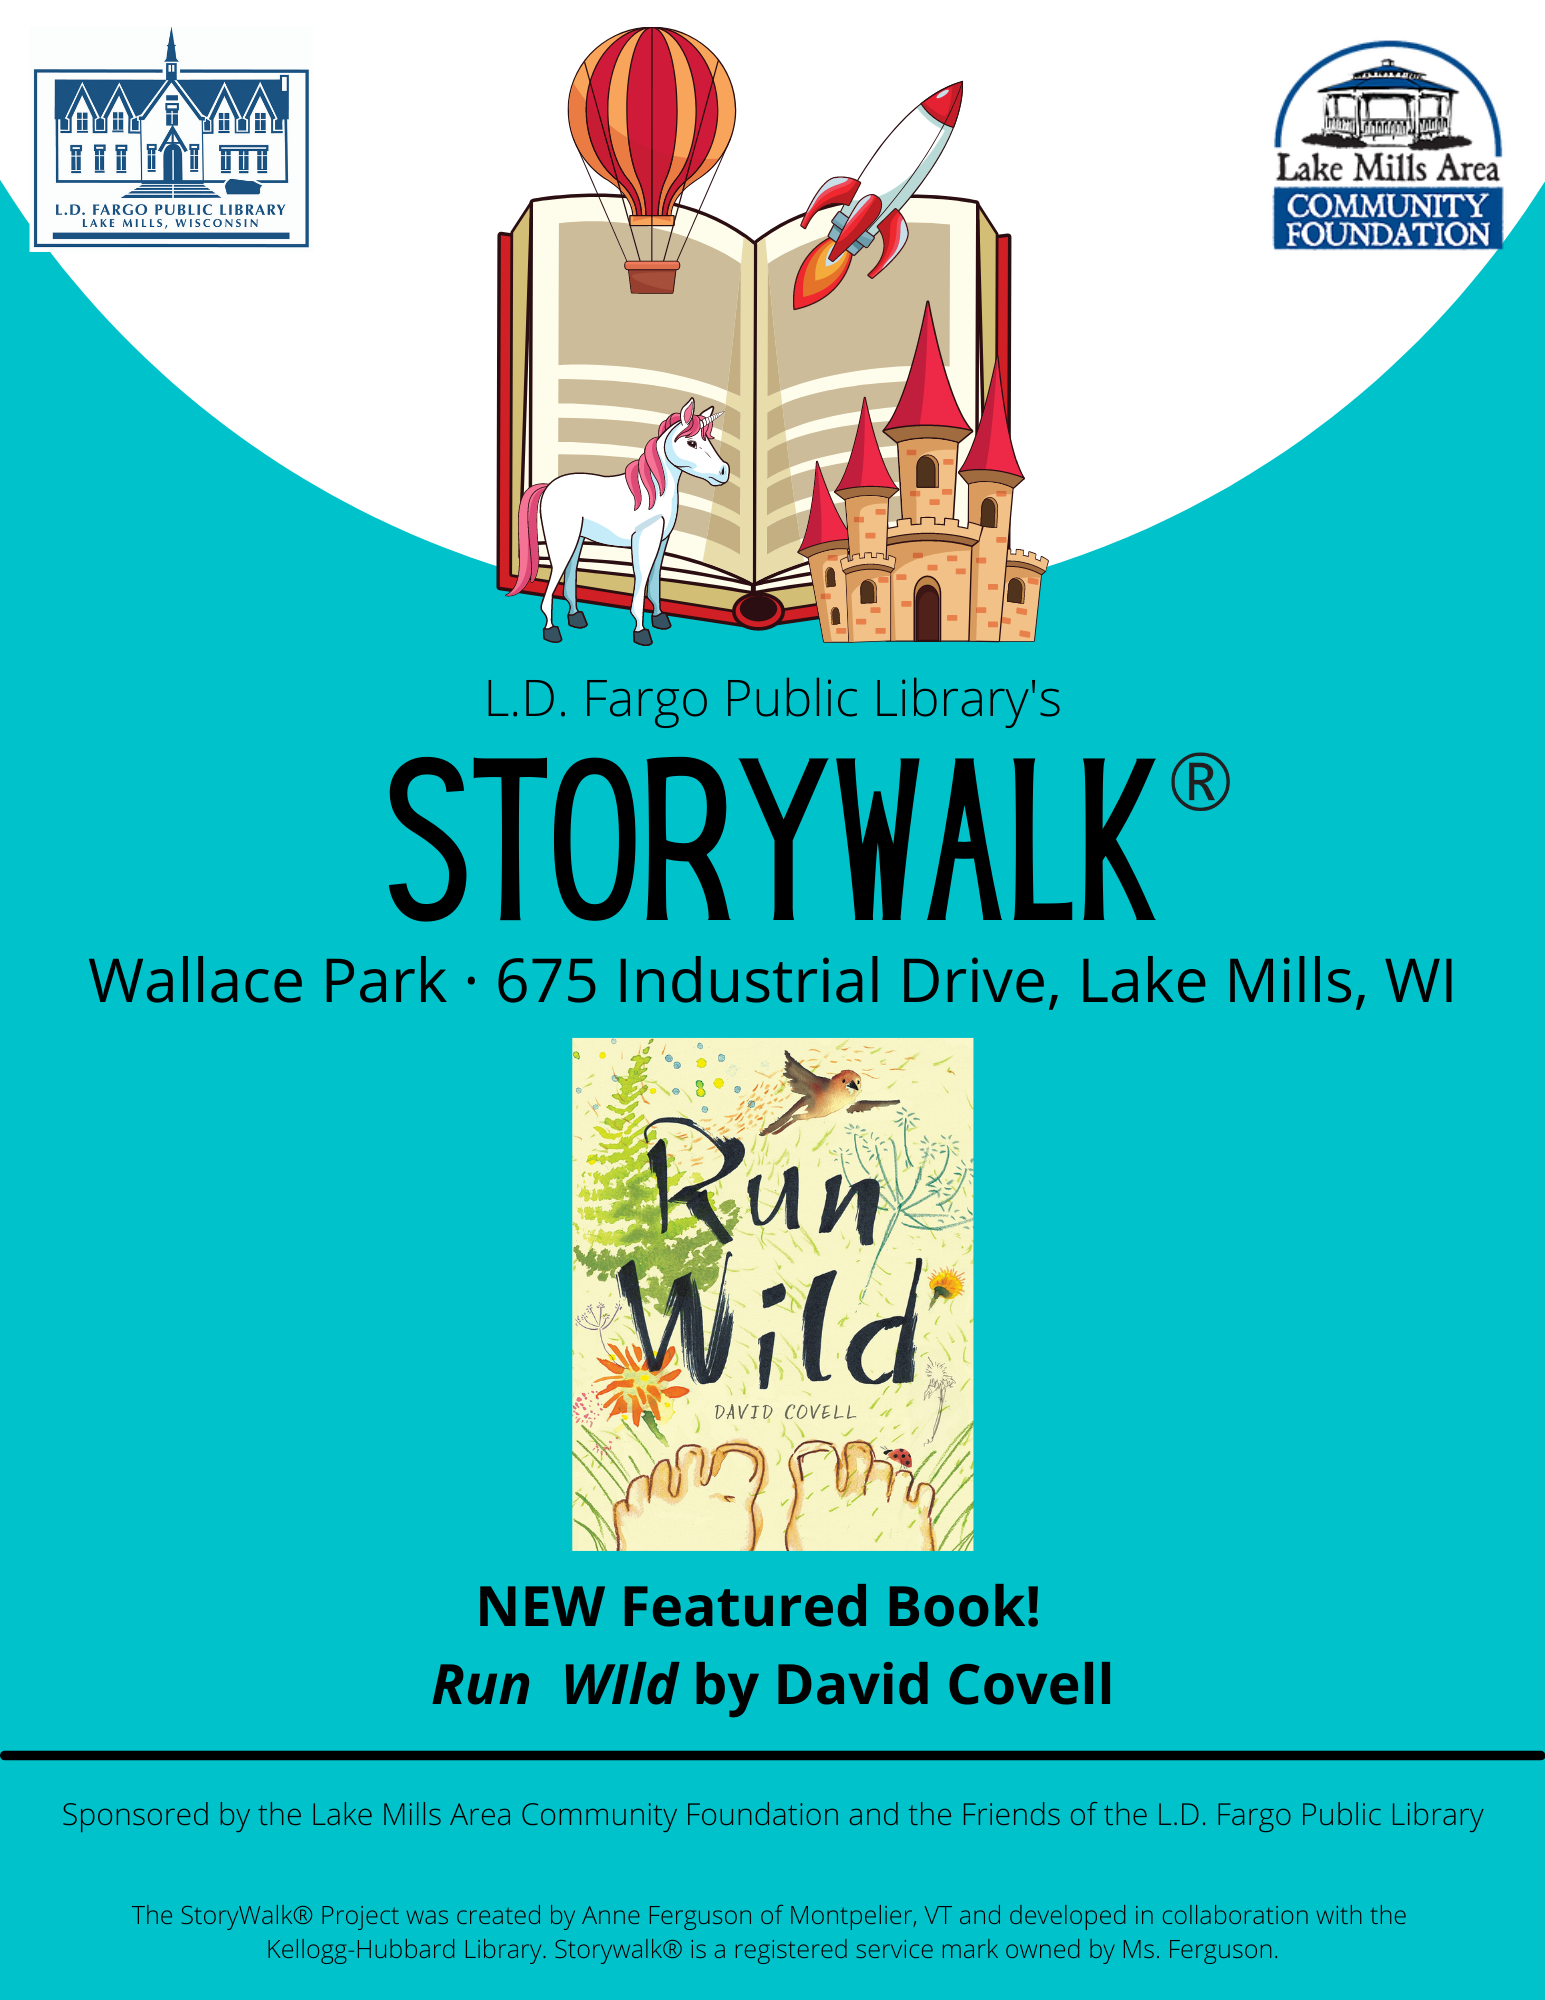 L.D. Fargo Public Library's Permanent StoryWalk® in Wallace Park!  675 Industrial Drive, Lake Mills, WI.   Follow the marked trail and read pages from a children's book as you walk and enjoy nature with your family.